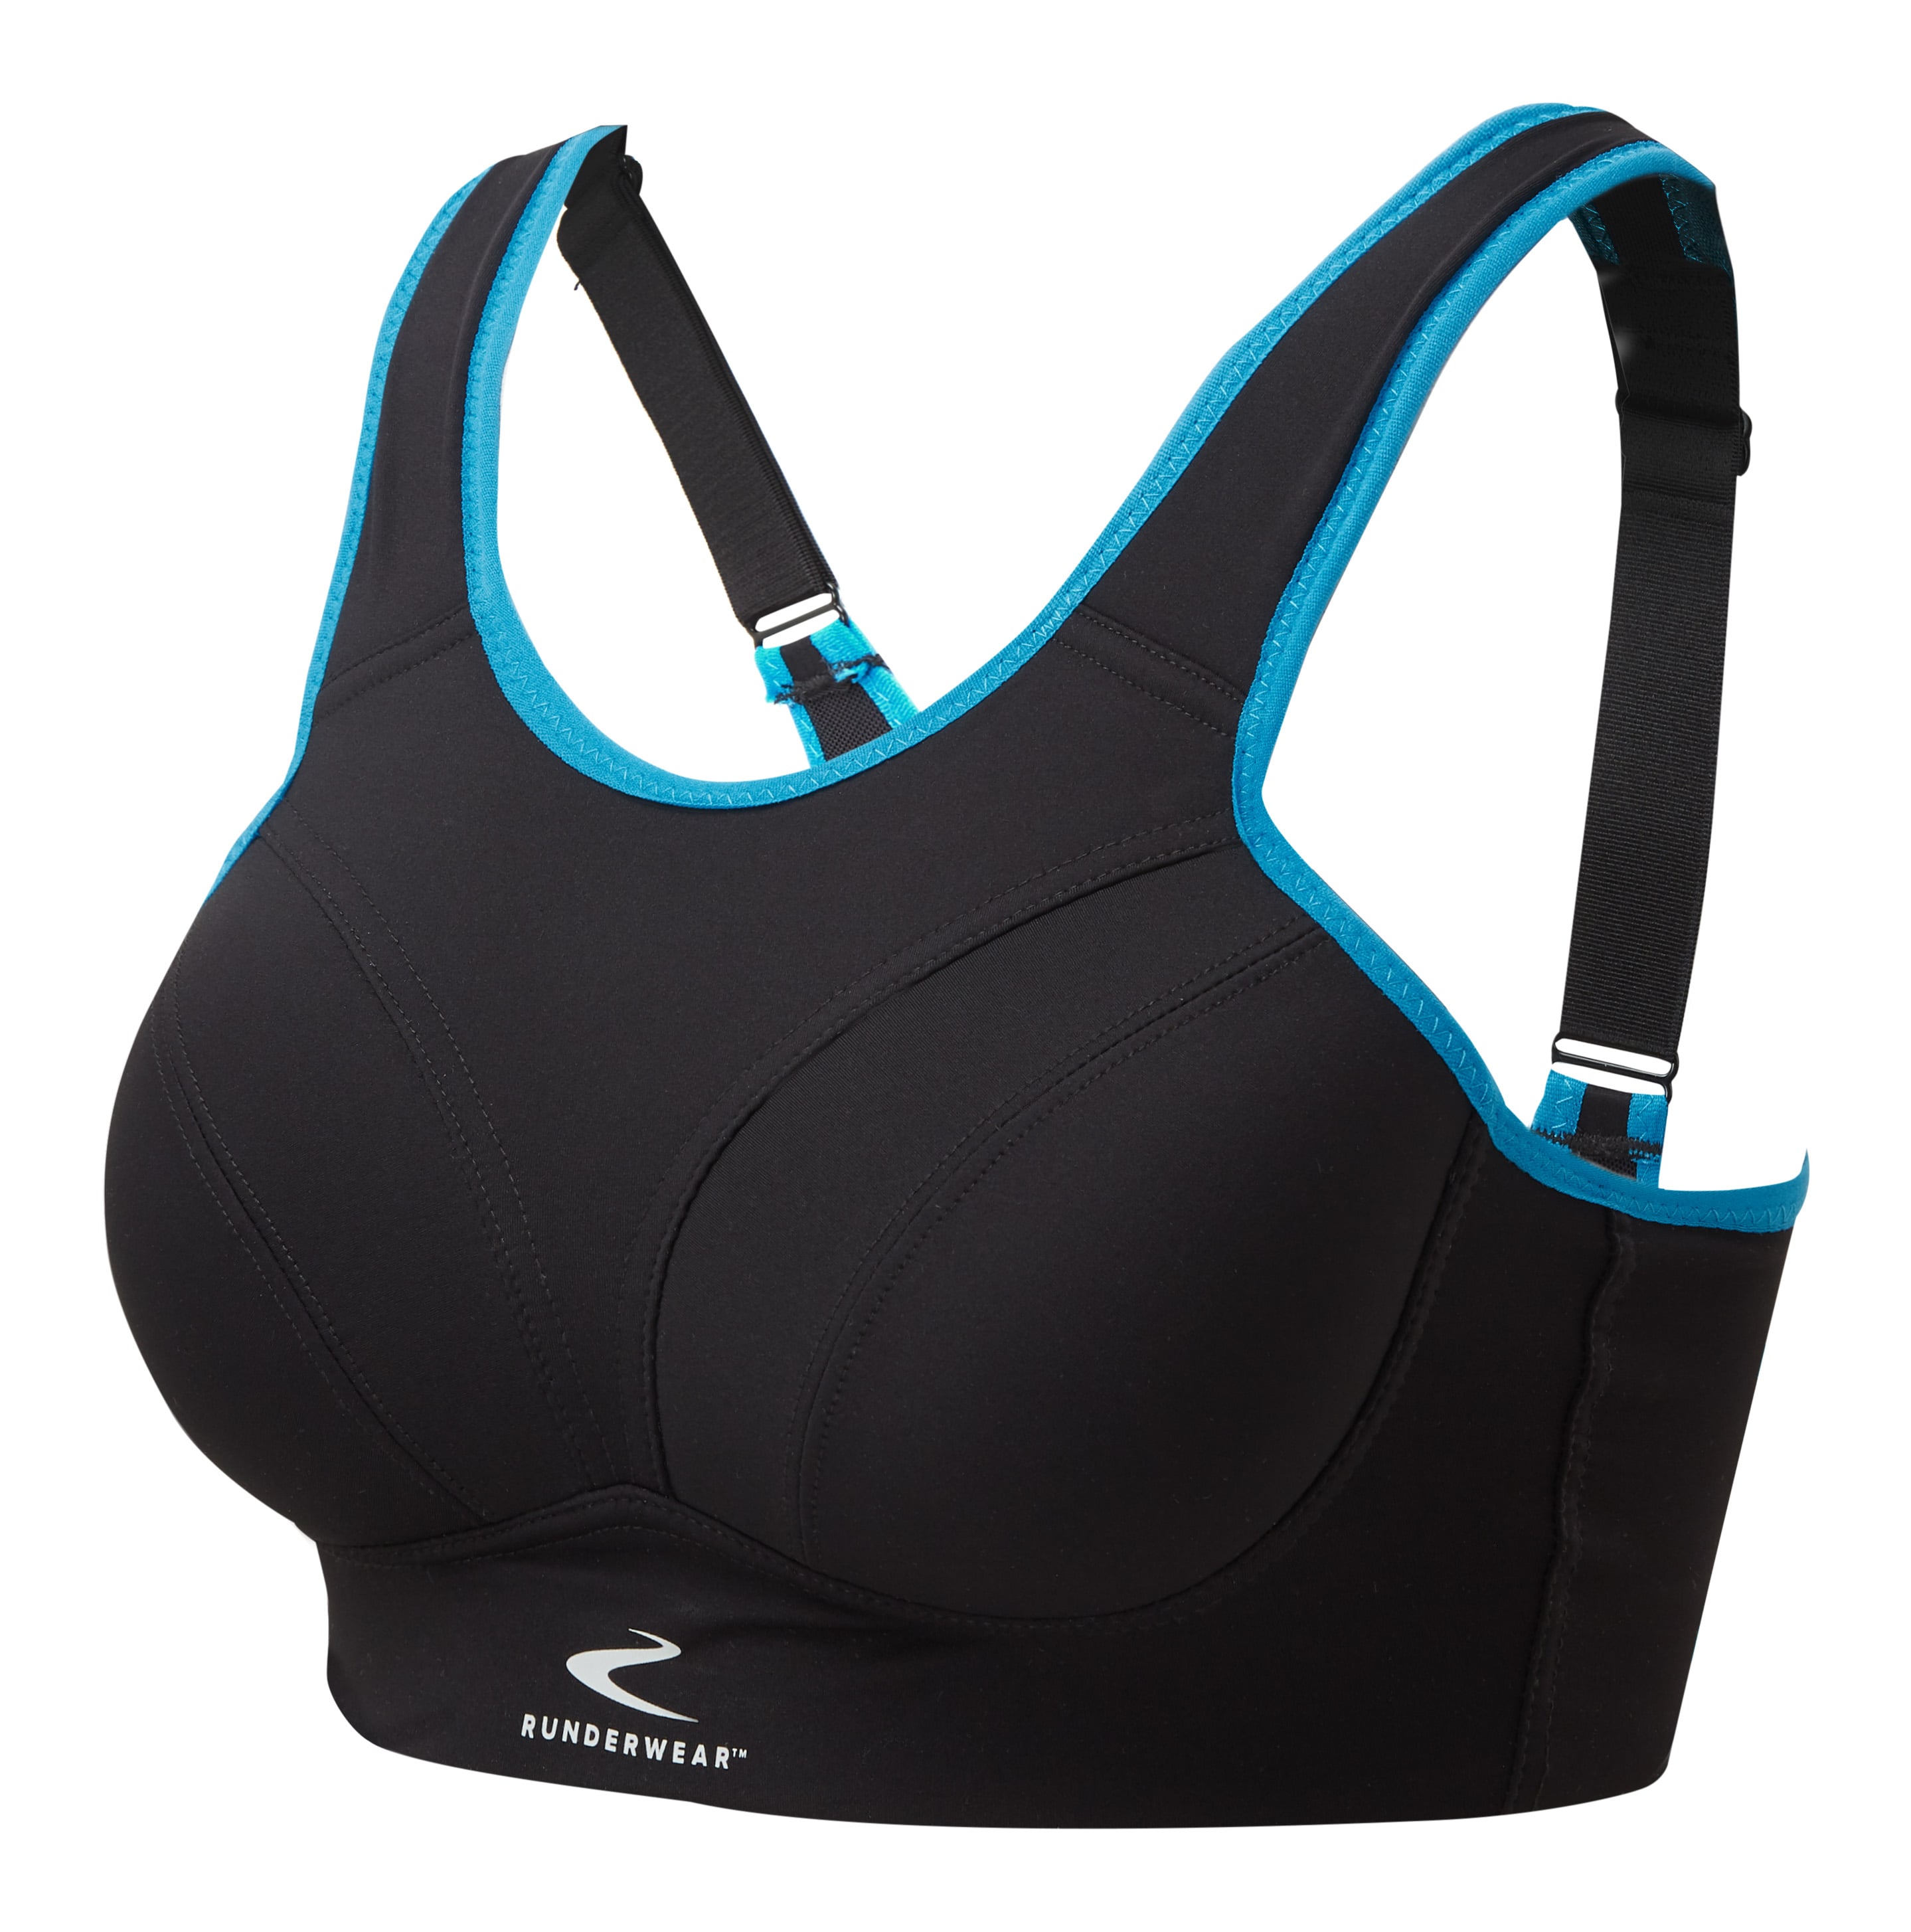 Used running sports bra - Easy to buy and guaranteed ads